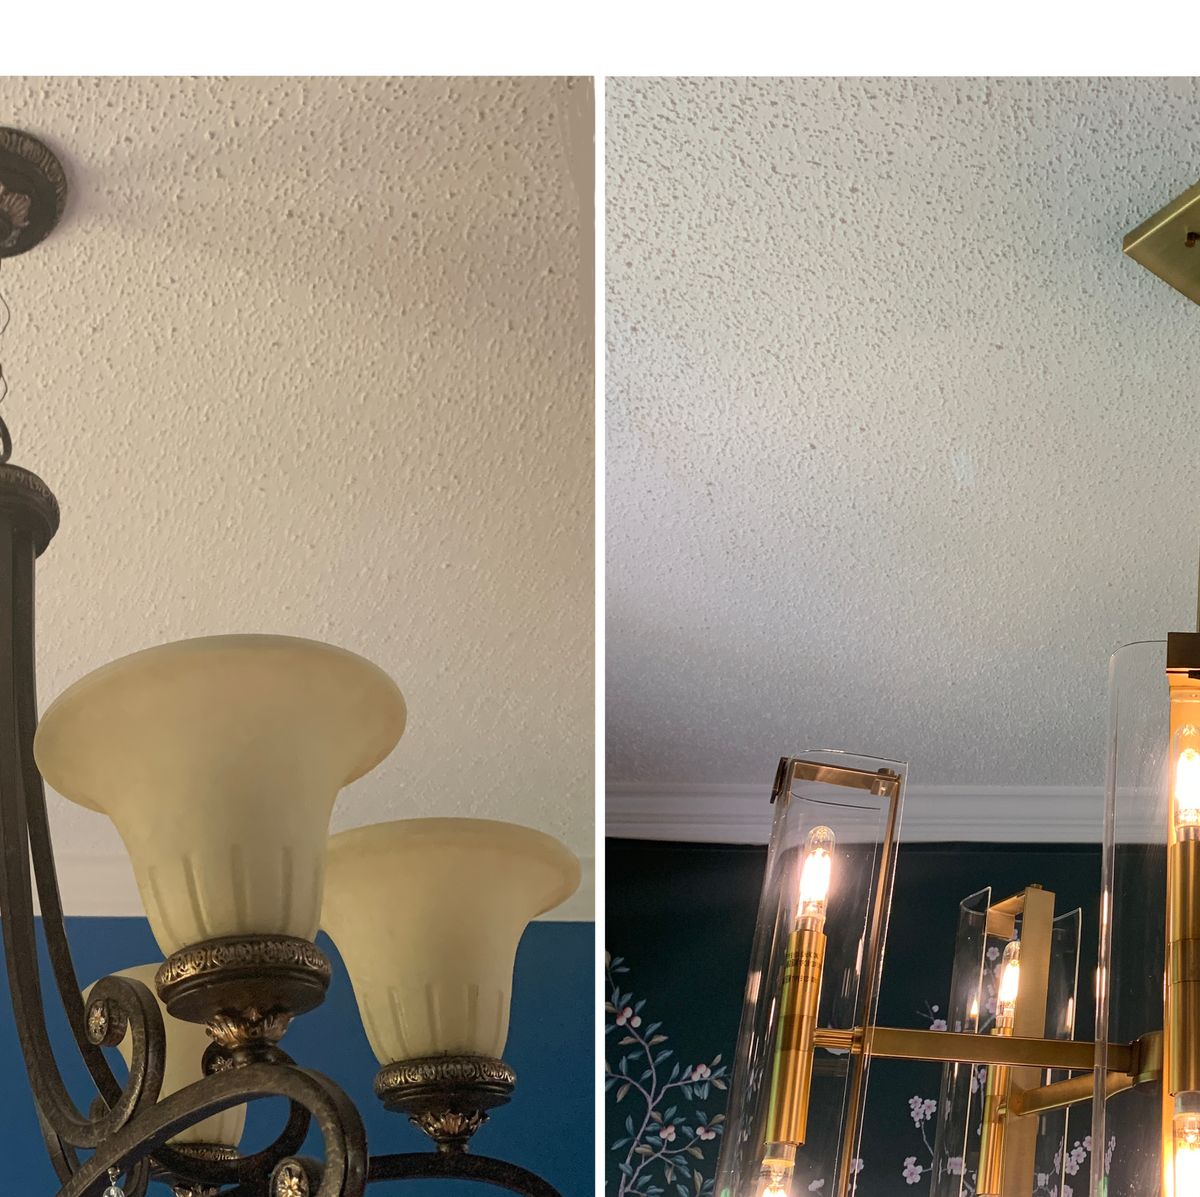 How to Change Light Fittings 